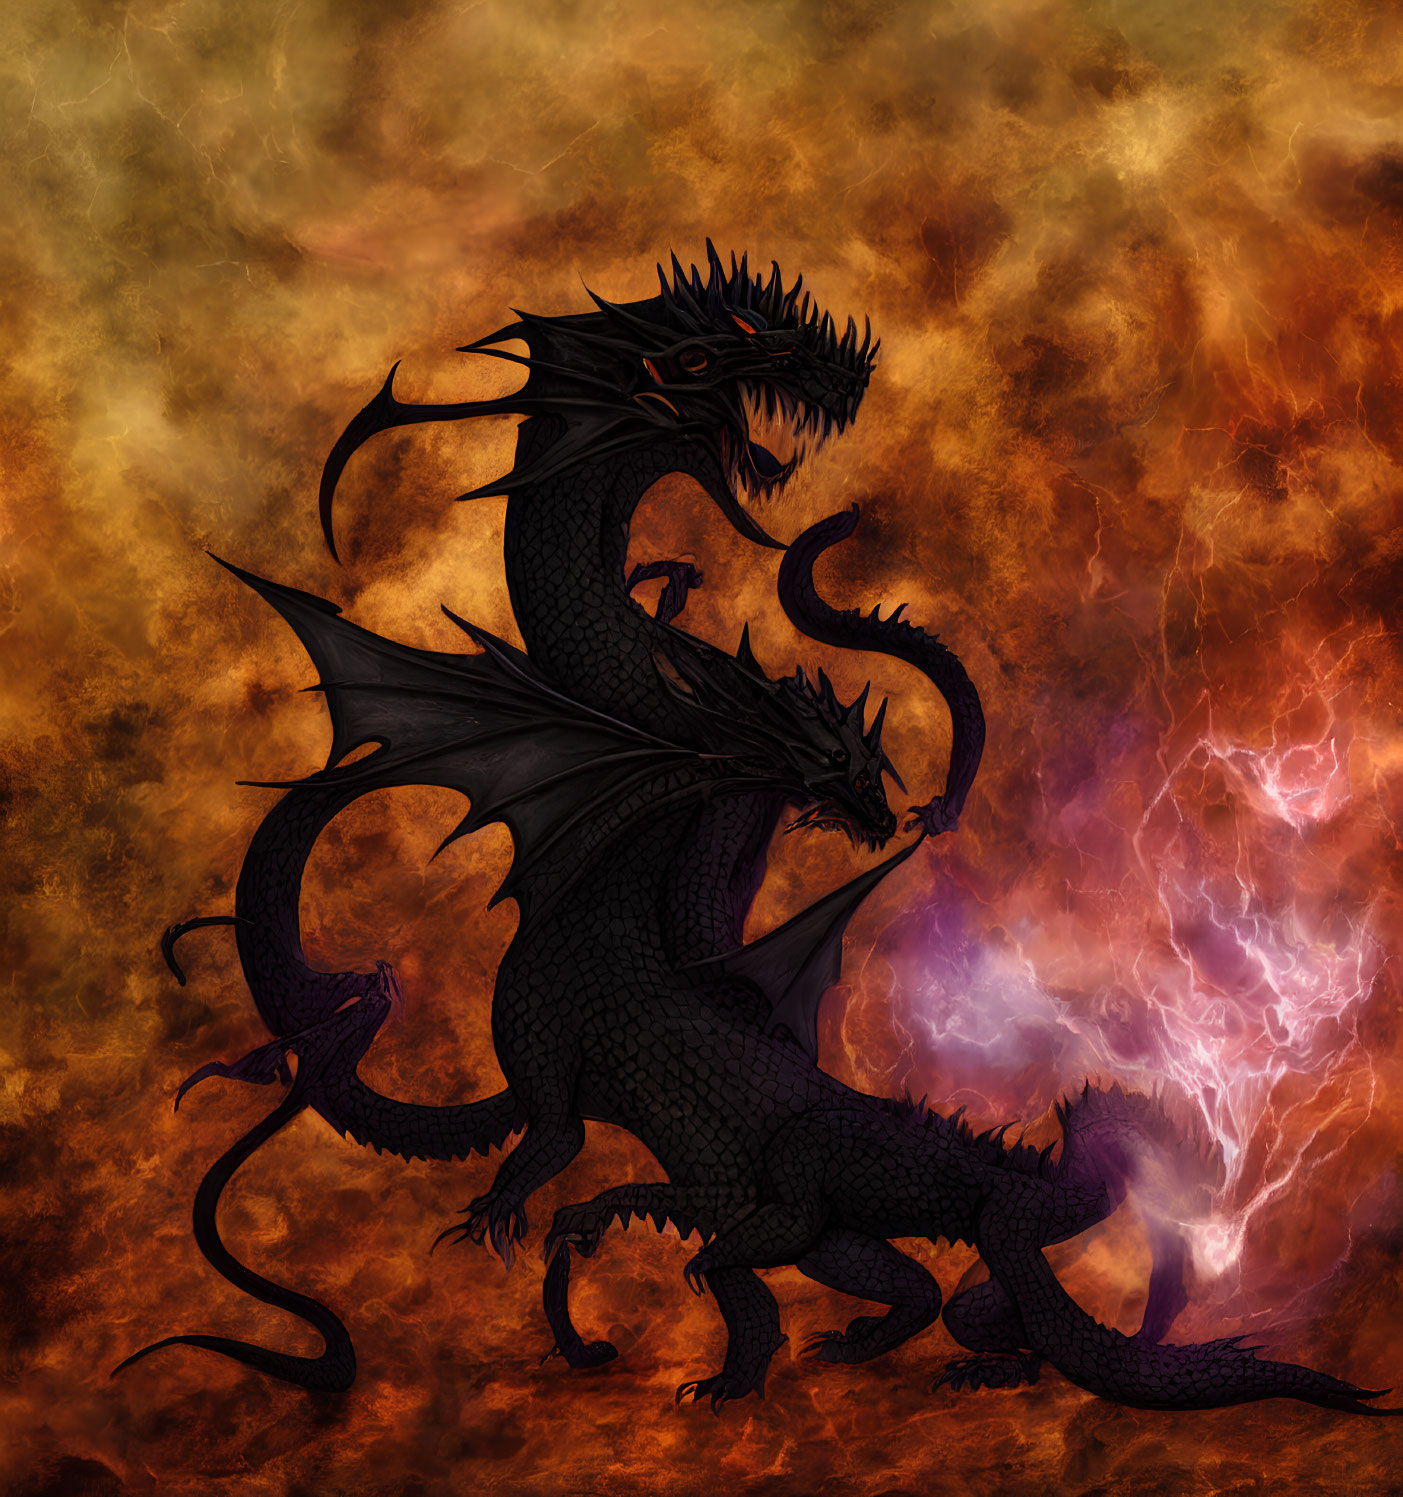 Black three-headed dragon with red eyes in fiery sky with purple clouds